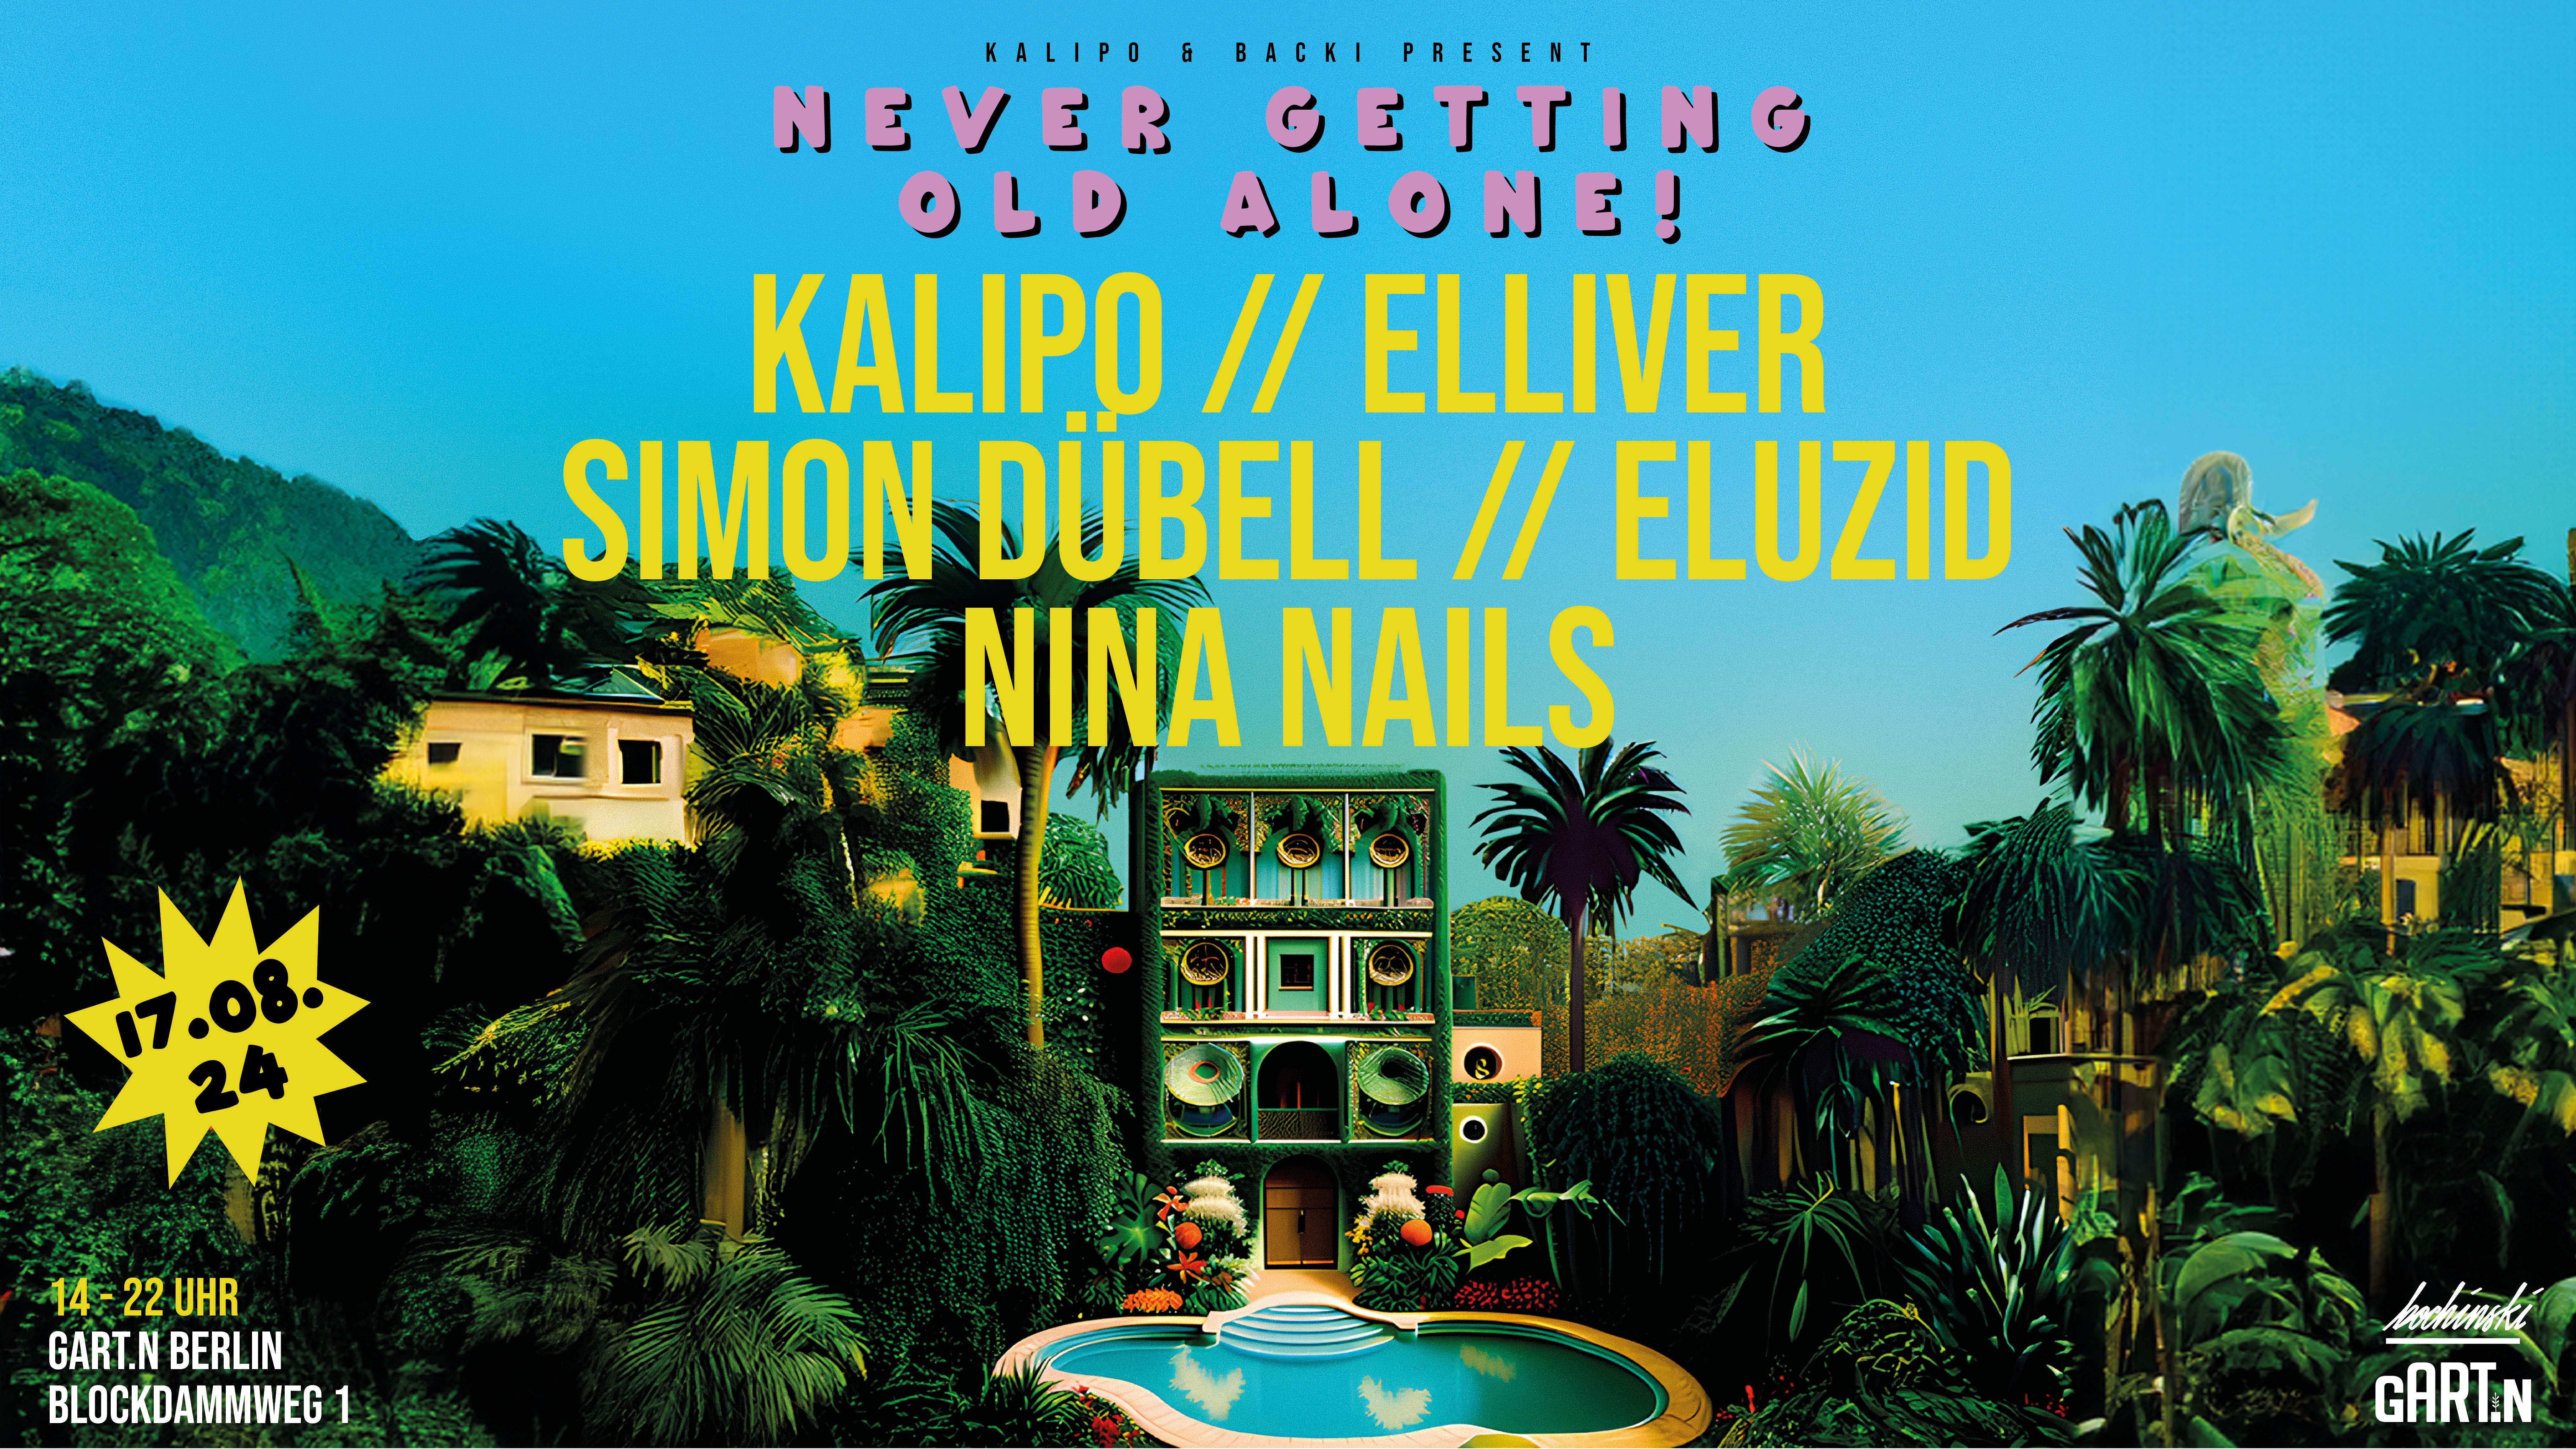 Kalipo & Backi present: Never Getting Old Alone - フライヤー表